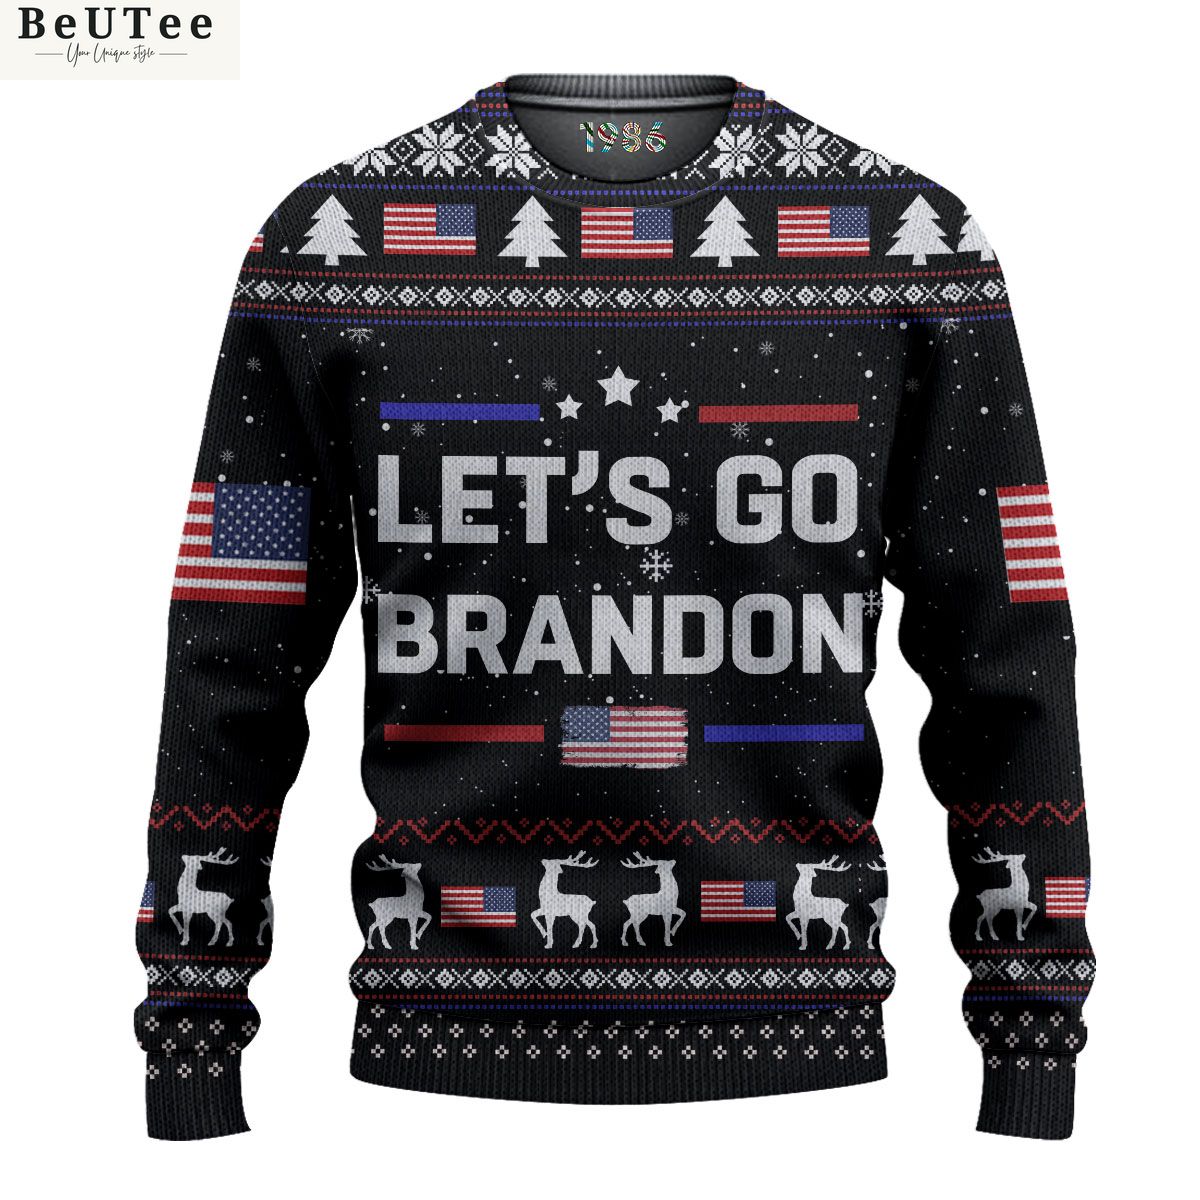 Let's go Brandon Premium Ugly Sweater The visual hierarchy is well executed.